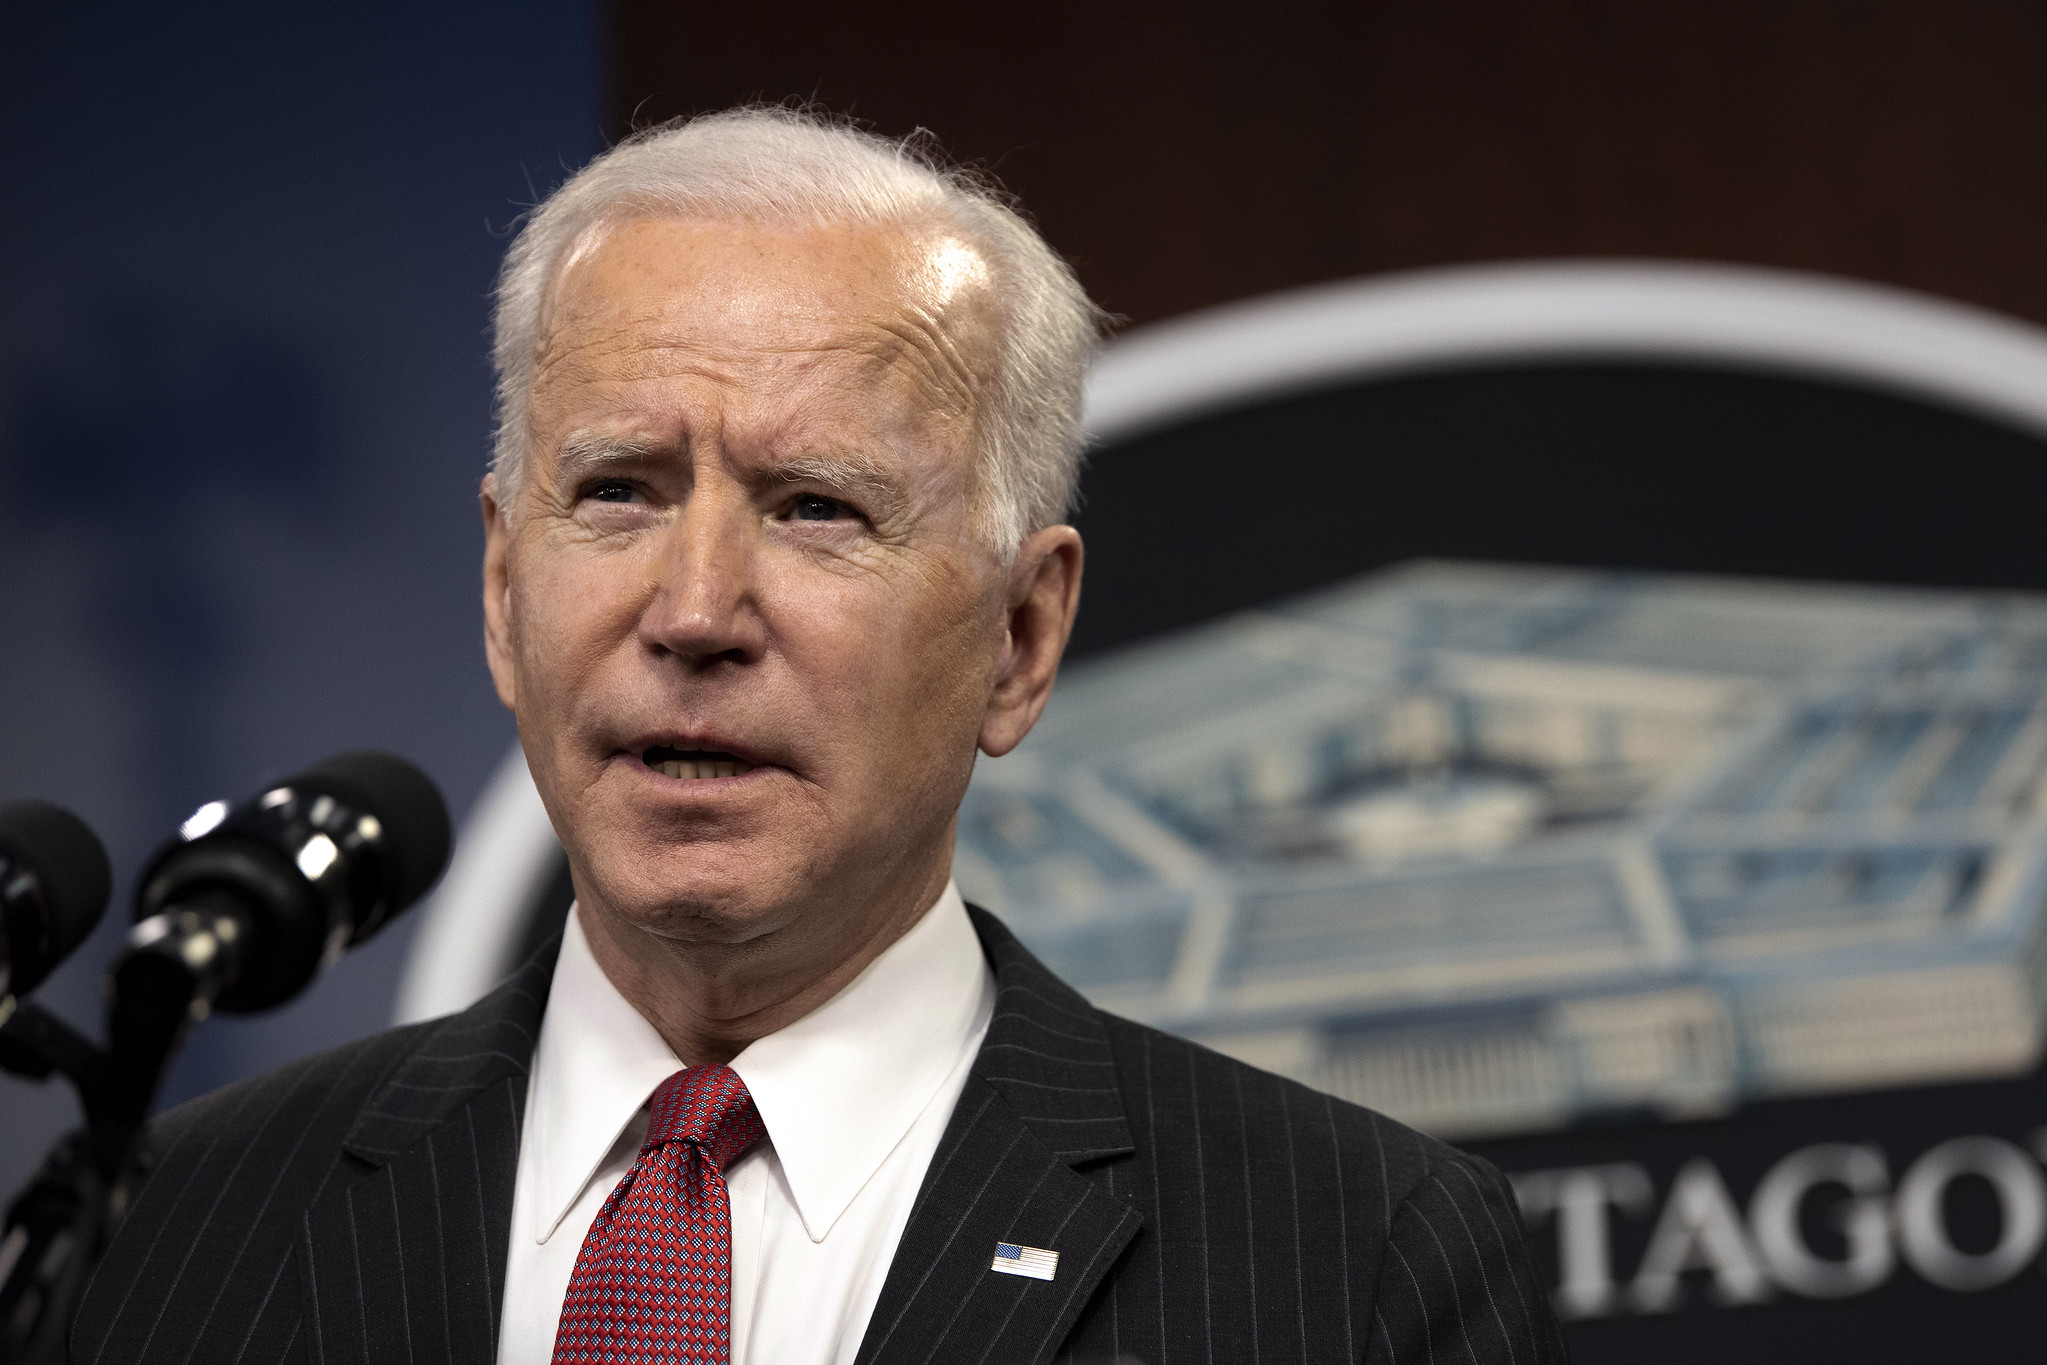 Biden Outlines Priorities for Economic Recovery, Immigration Reform, and Climate Action During Congressional Address